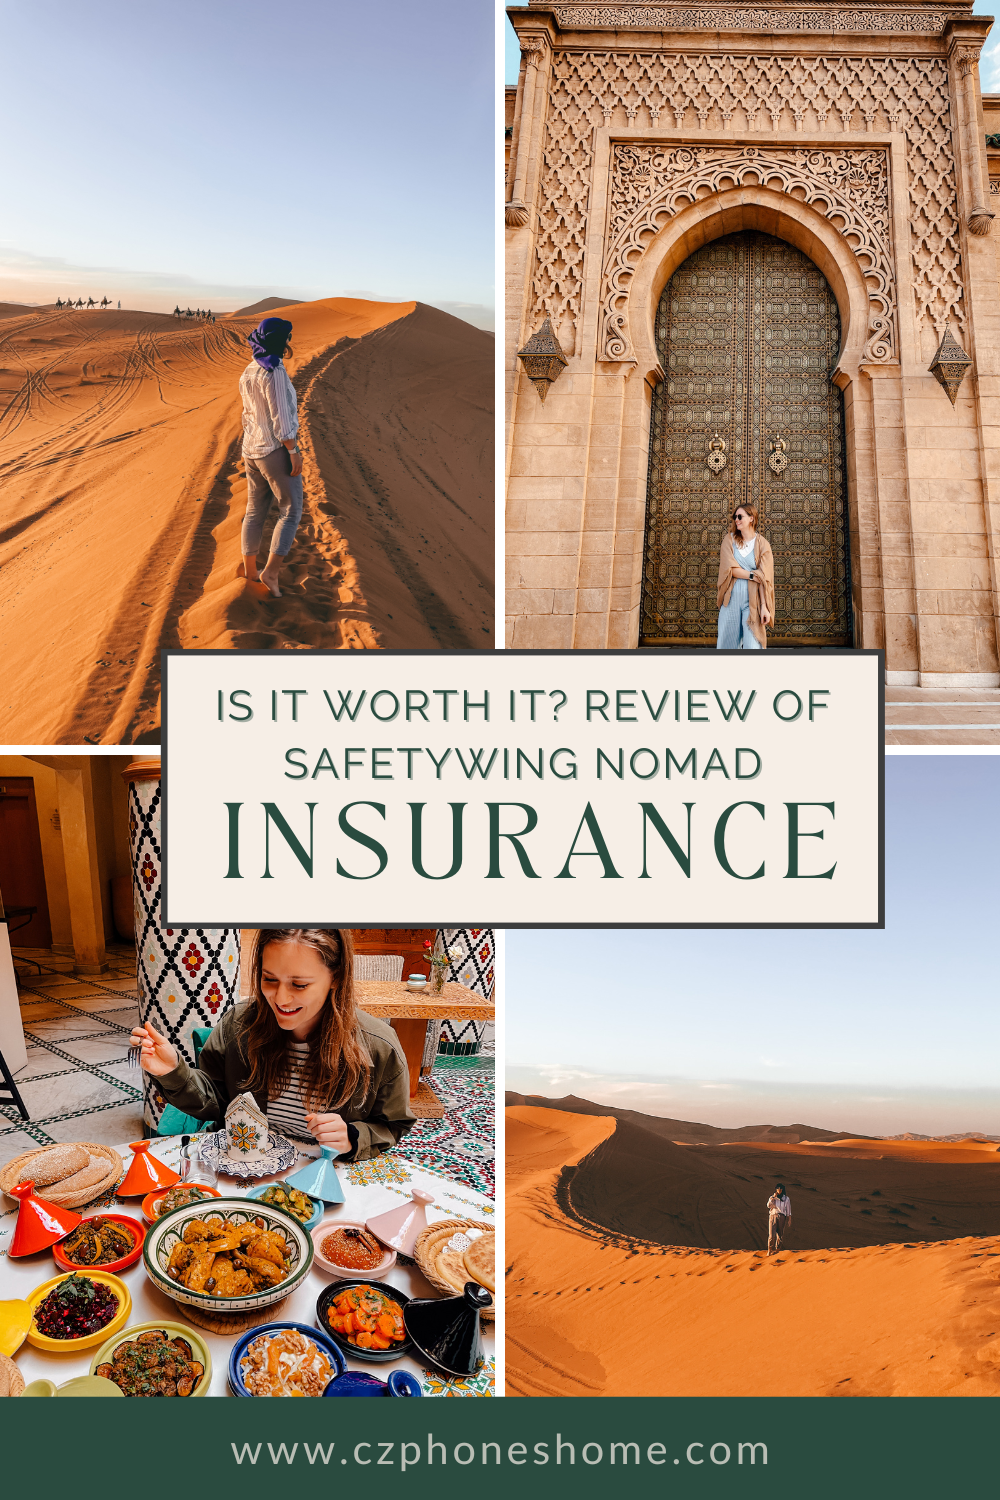 SafetyWing Nomad Insurance: my honest review 